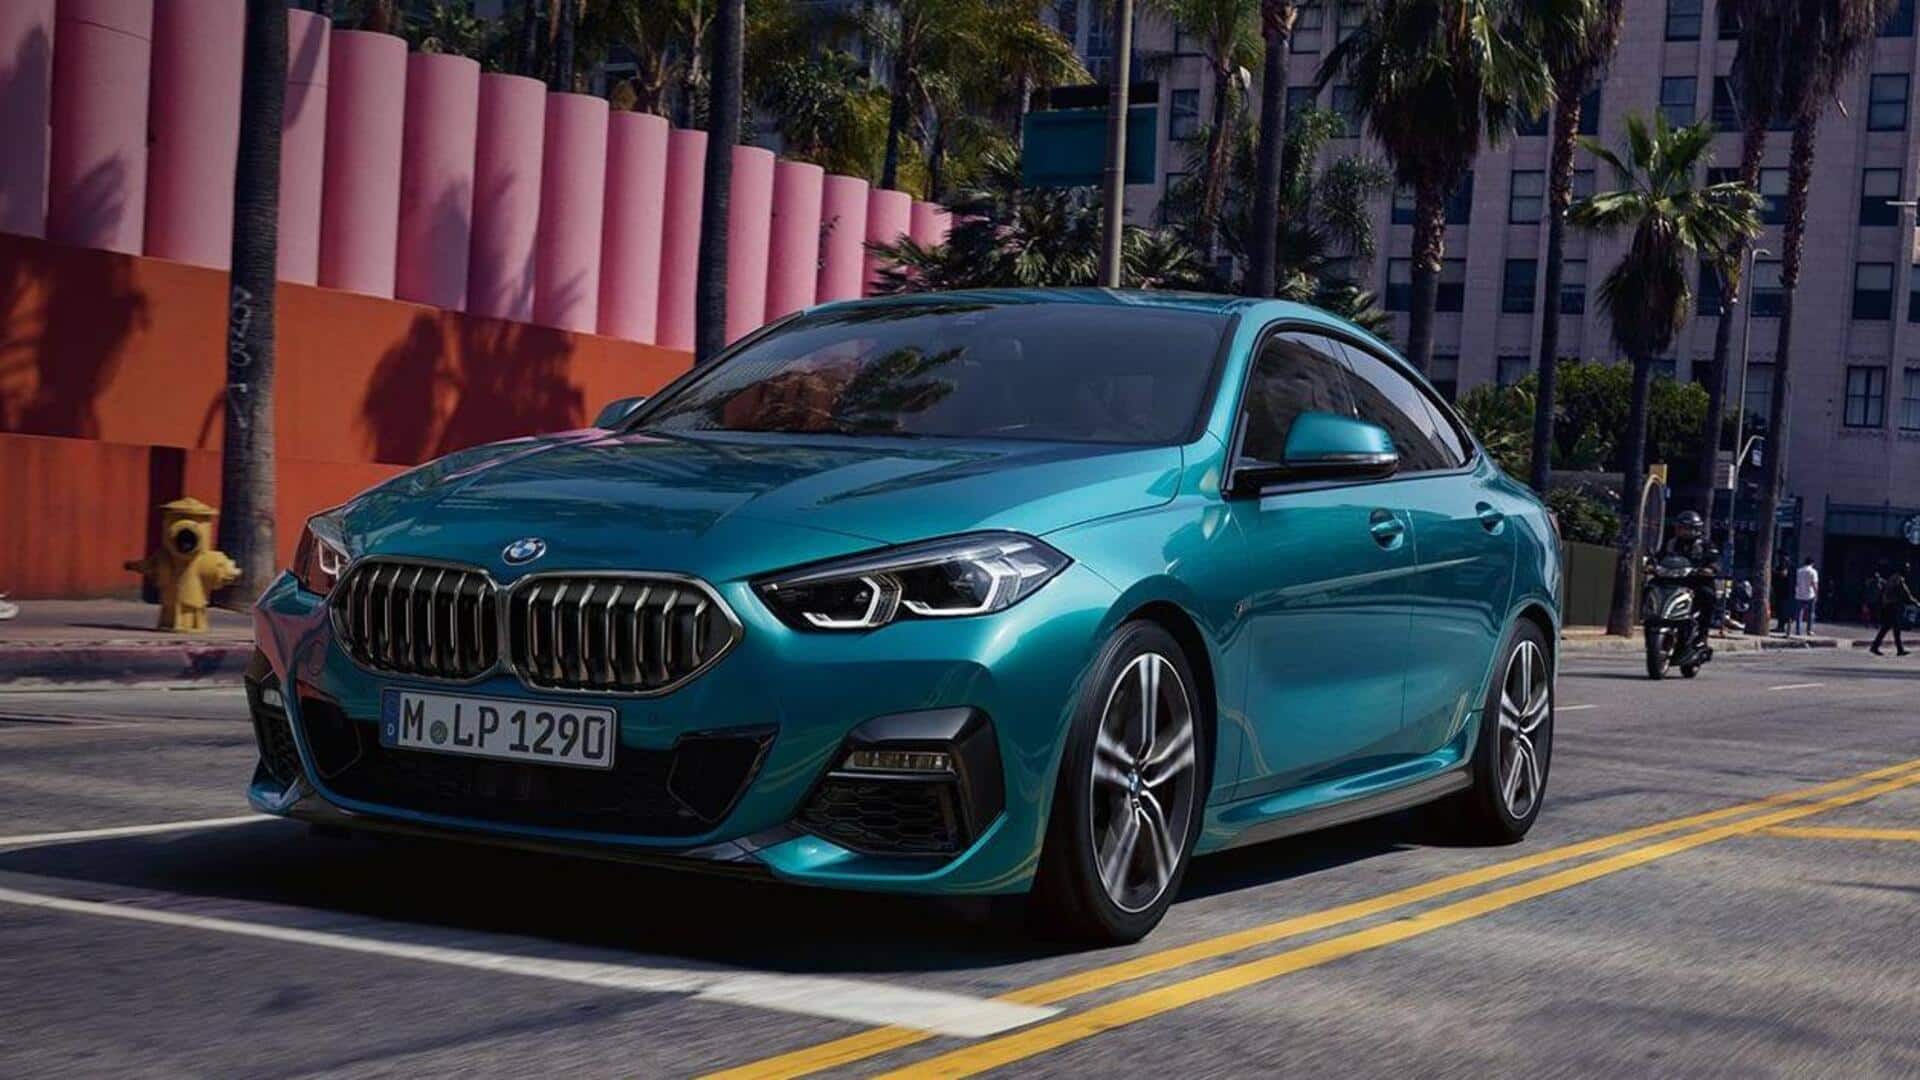 BMW 2 Series Gran Coupe becomes costlier by Rs. 50,000